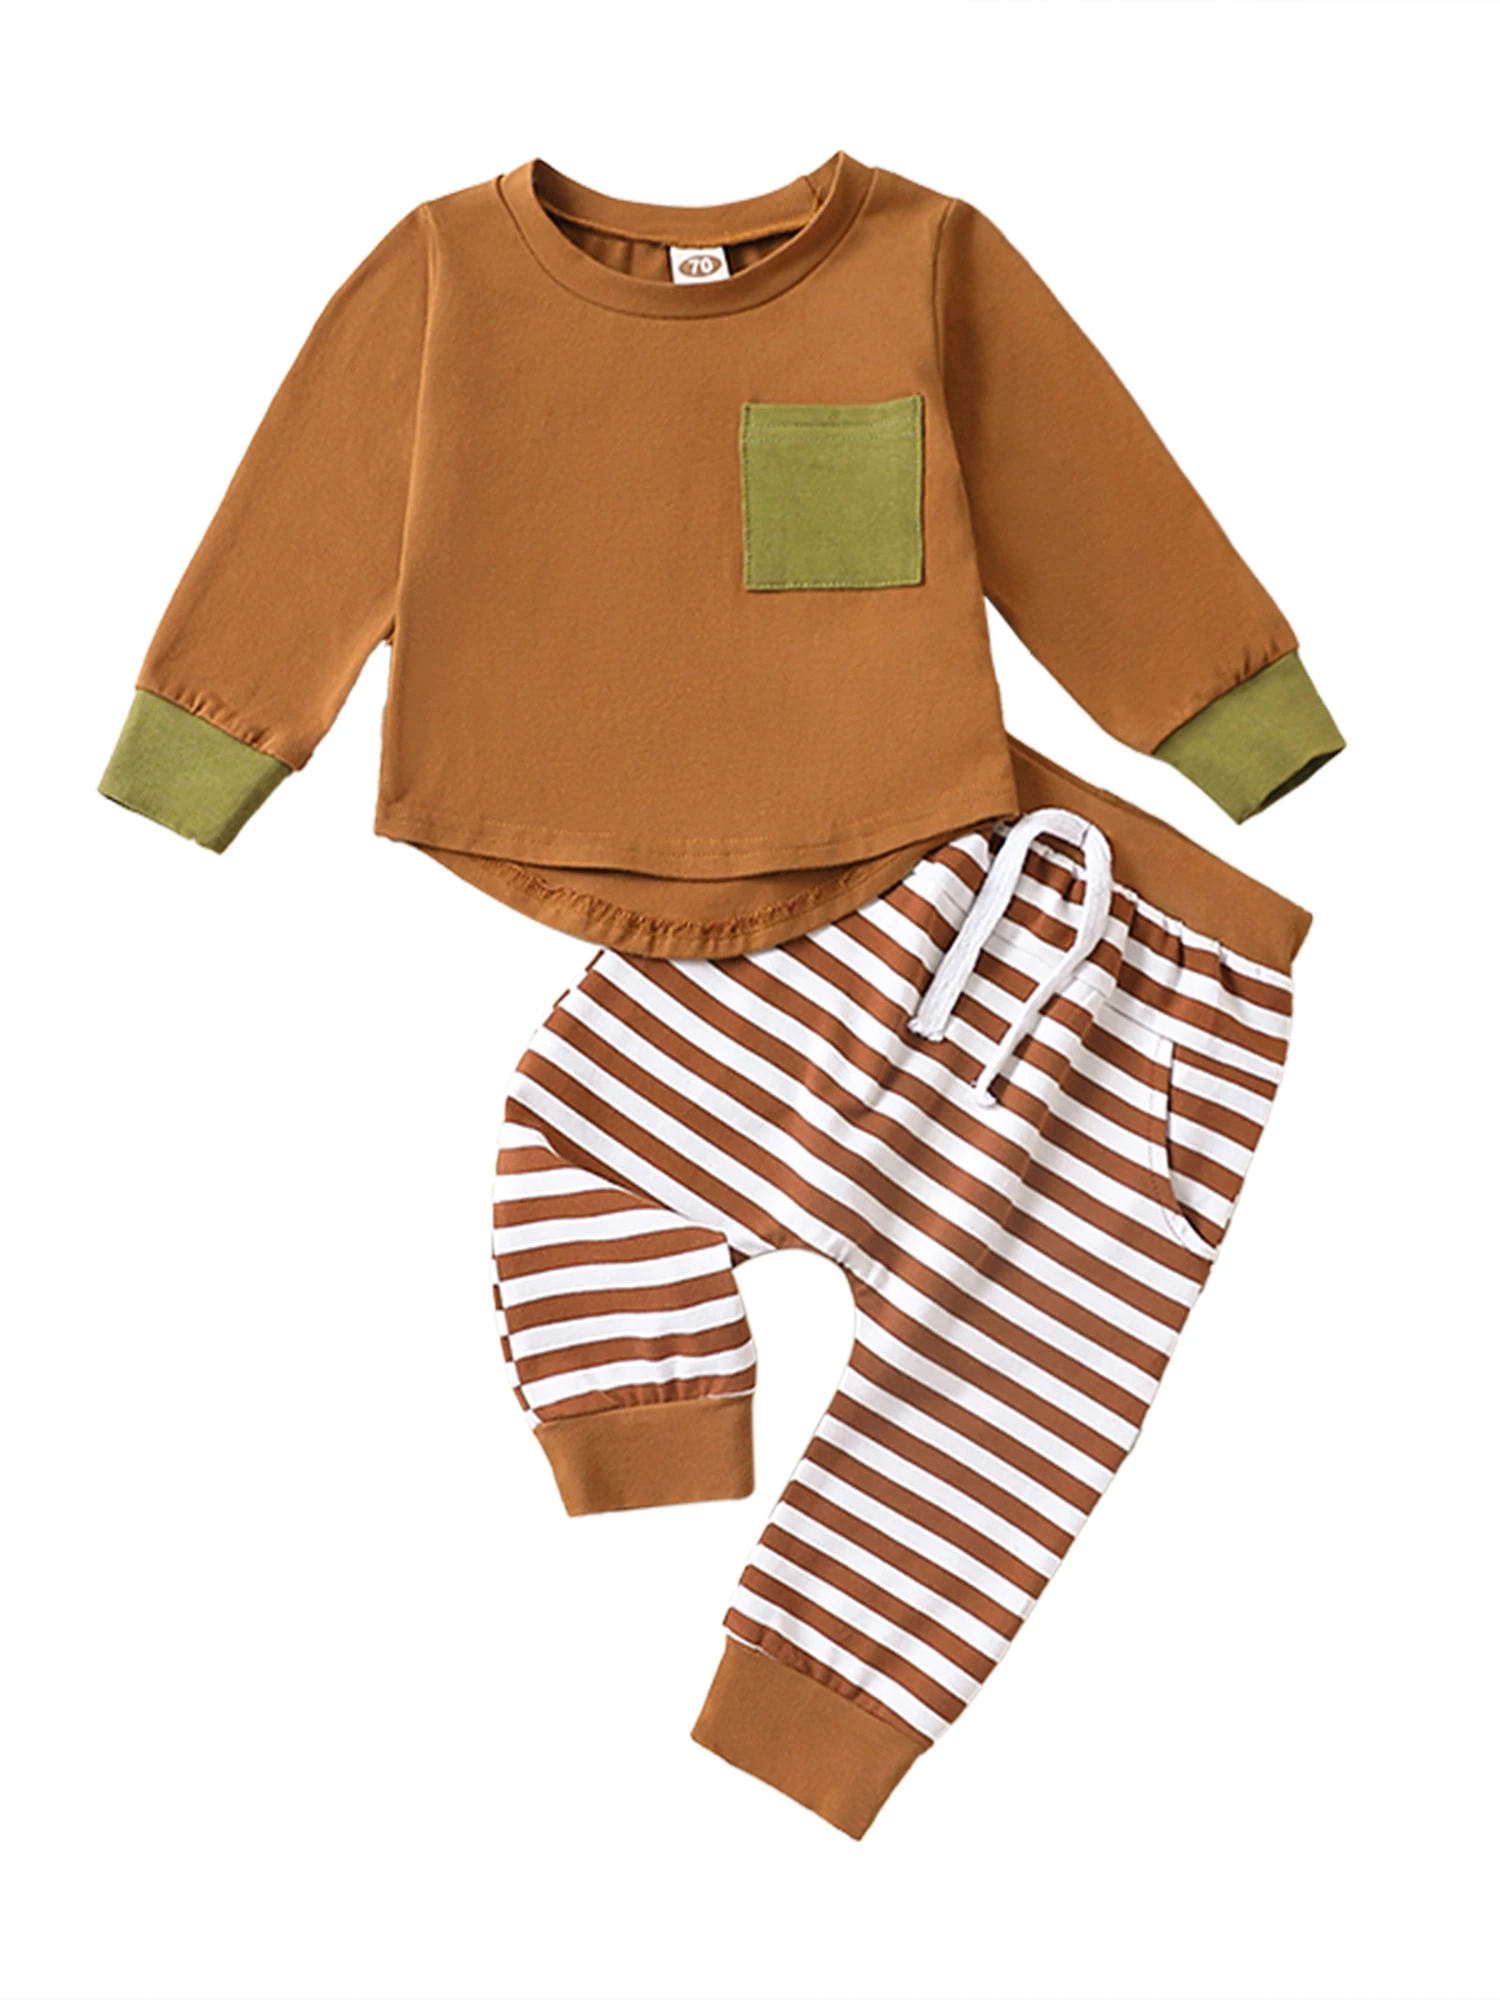 

Adorable Toddler Boy Winter Clothes Set with Long Sleeve Sweatshirt and Jogger Pants in Contrasting Colors - Perfect Fall